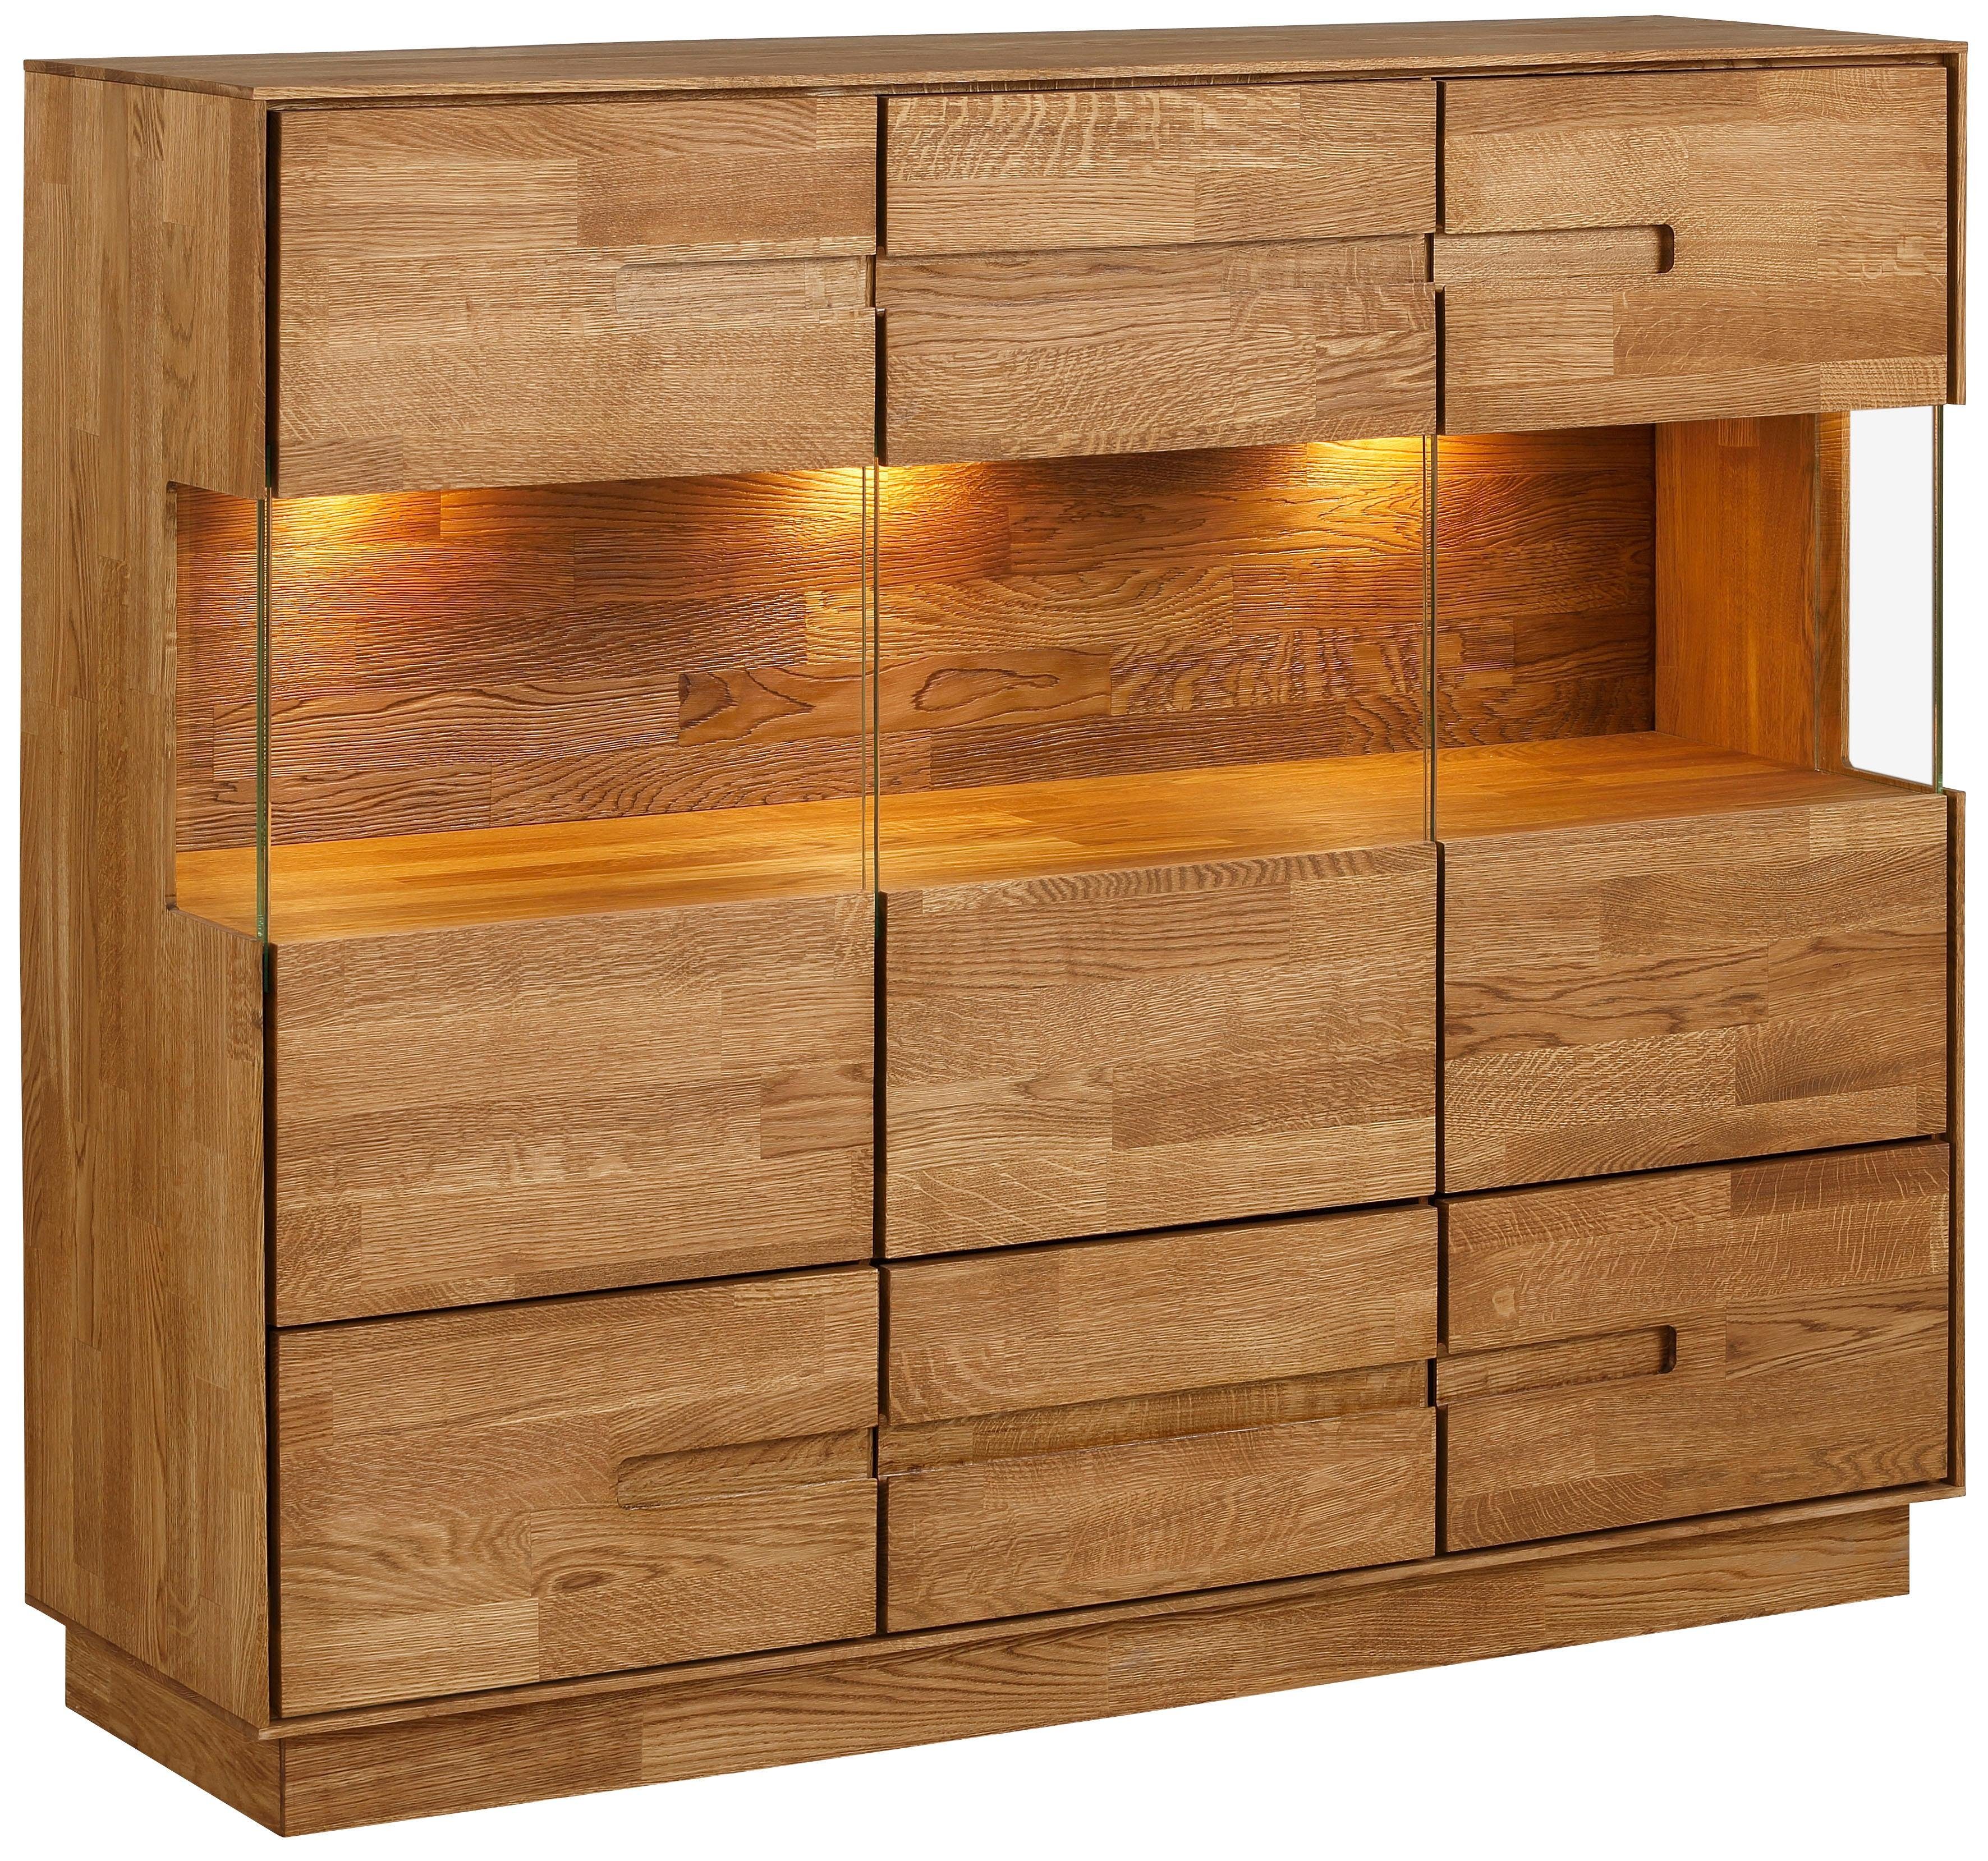 Premium collection by Home affaire Highboard »Pavo«, inklusive LED Beleuchtung-kaufen